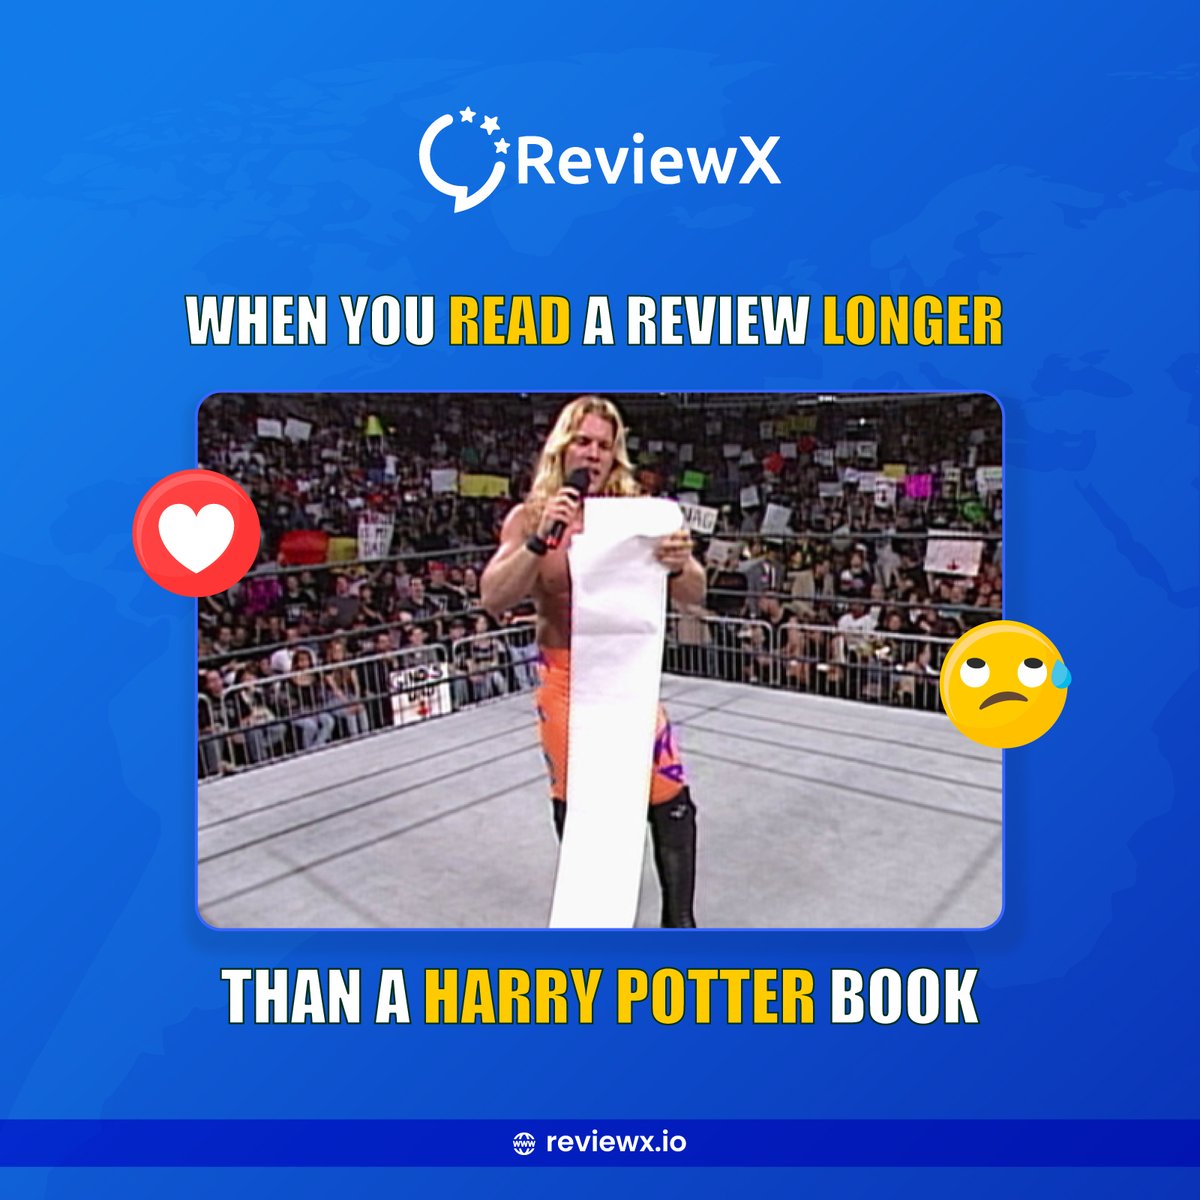 We don't care about the length as long as it's a positive one!

#ReviewX #Facts #WordPressPlugin #WooCommerceReviews #wordpressreviewplugin #reviews #ecommerce #ecommercefacts